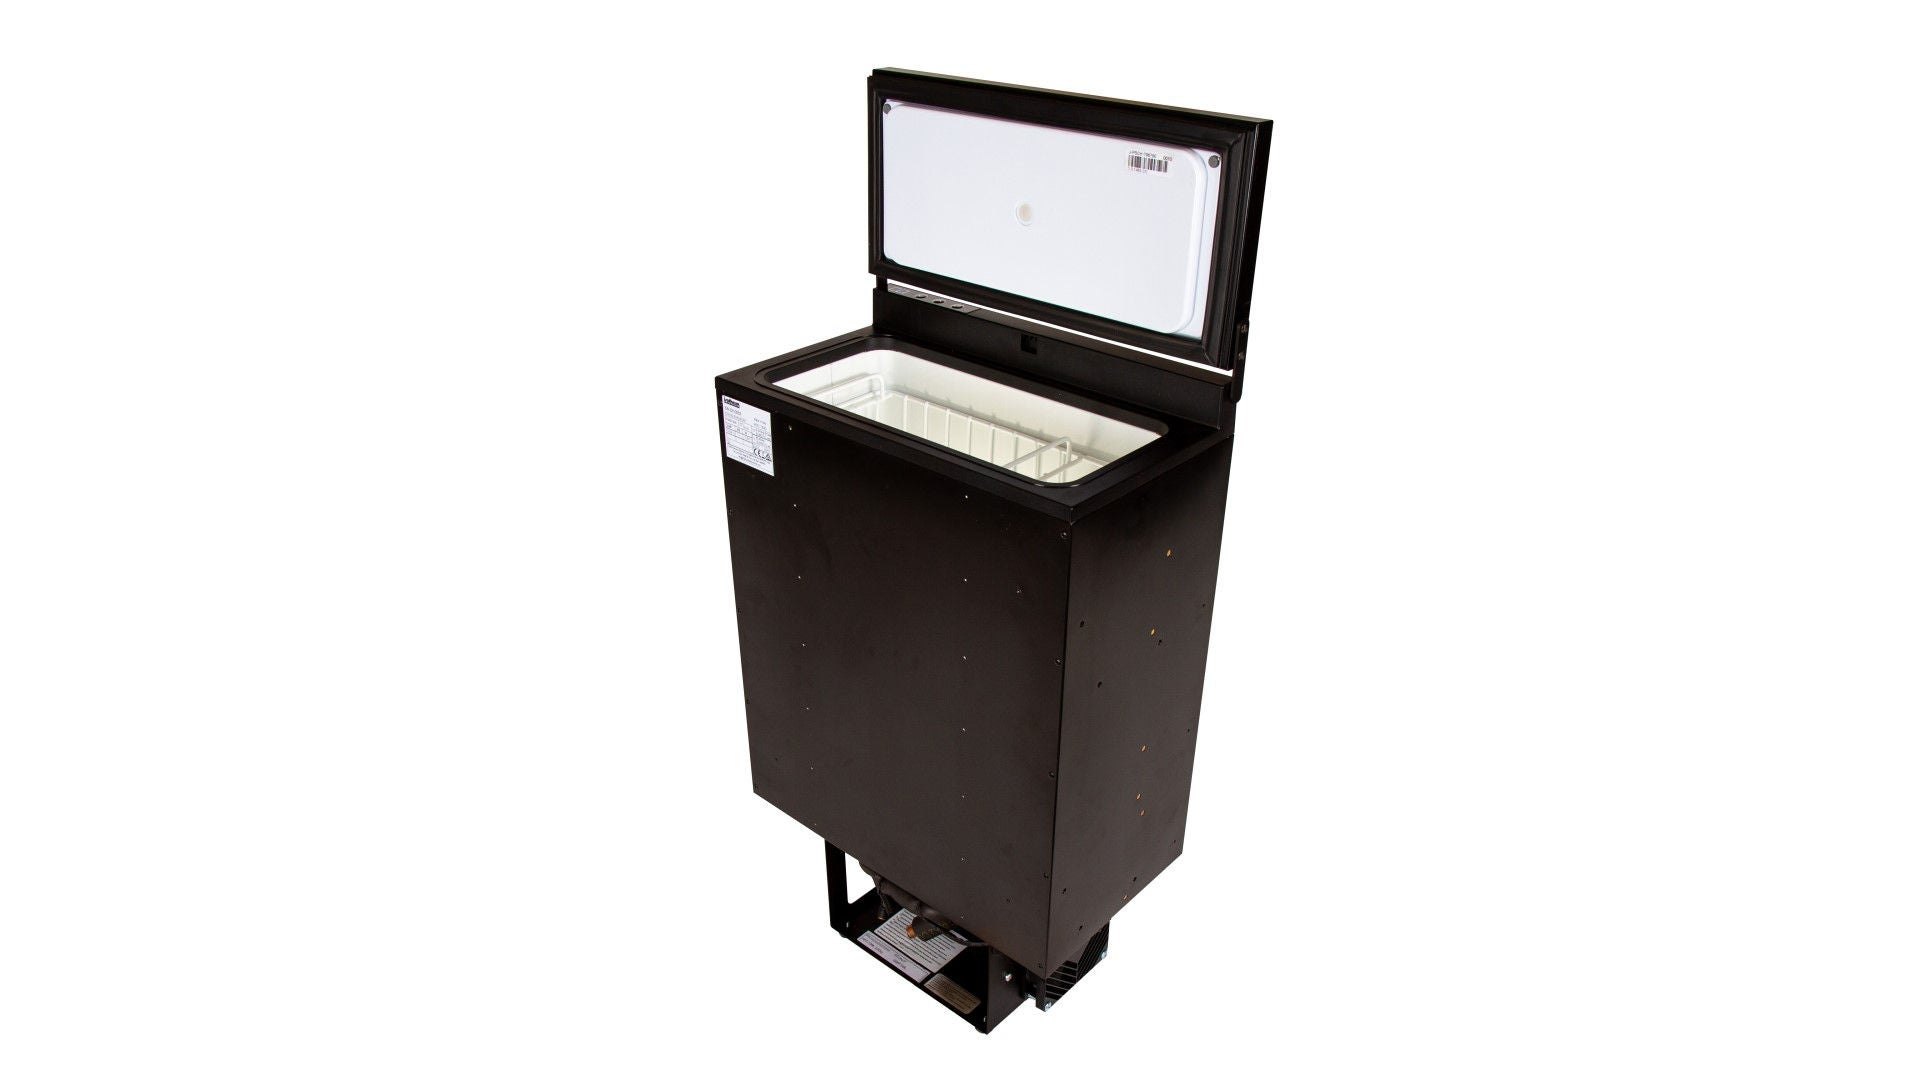 Product picture of BI 30 cooling box with open lid